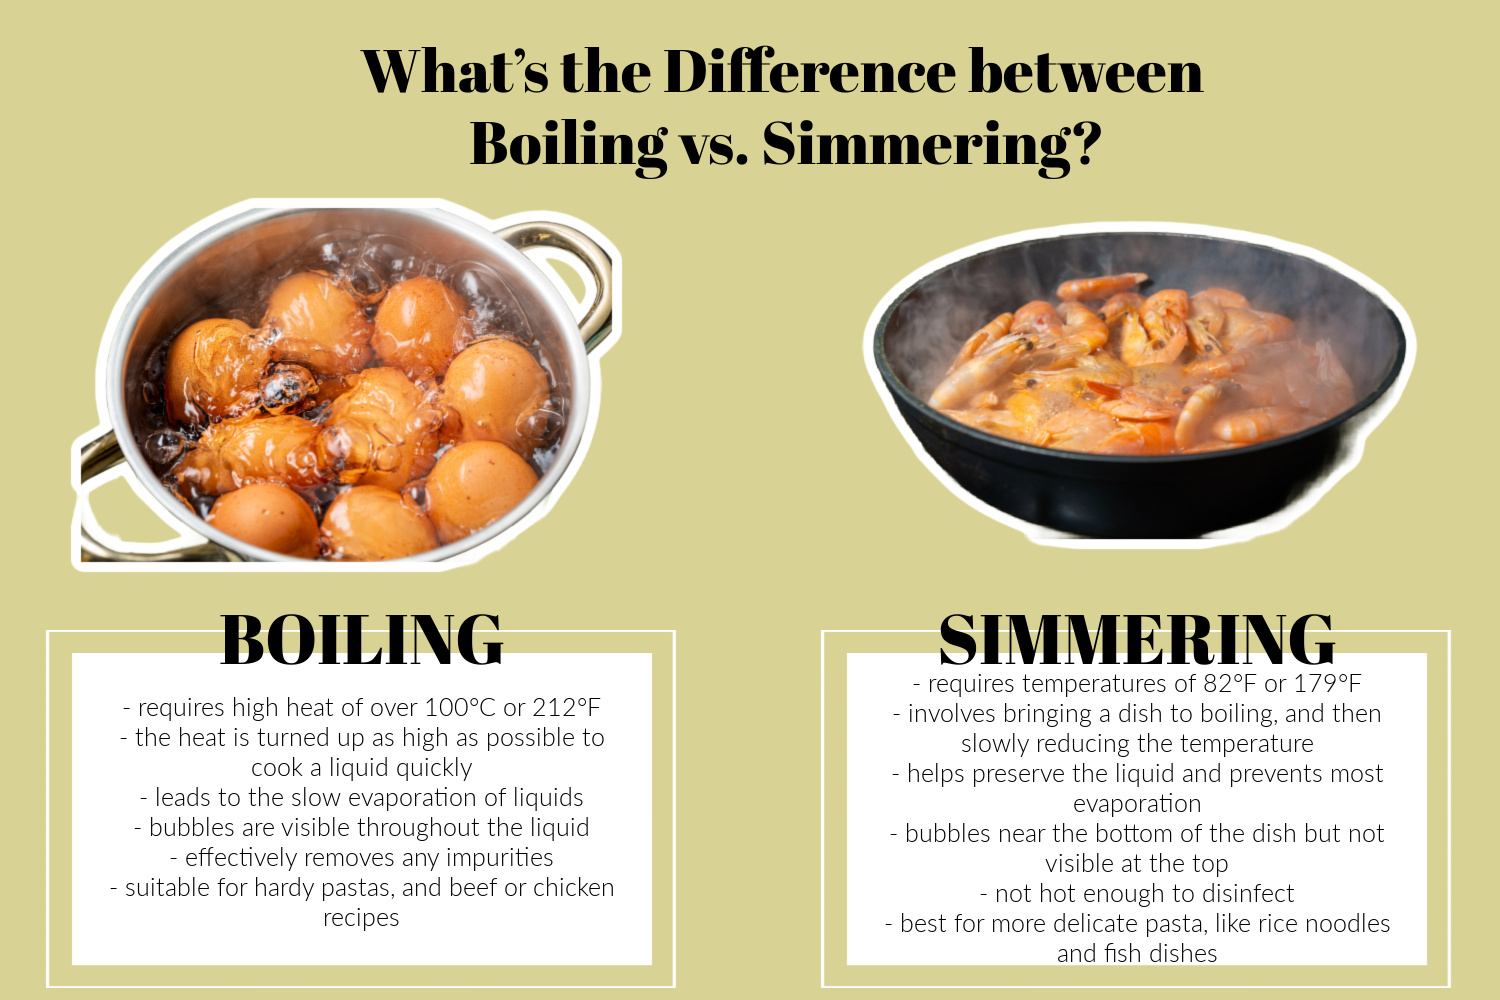 What’s the Difference between Boiling vs. Simmering?